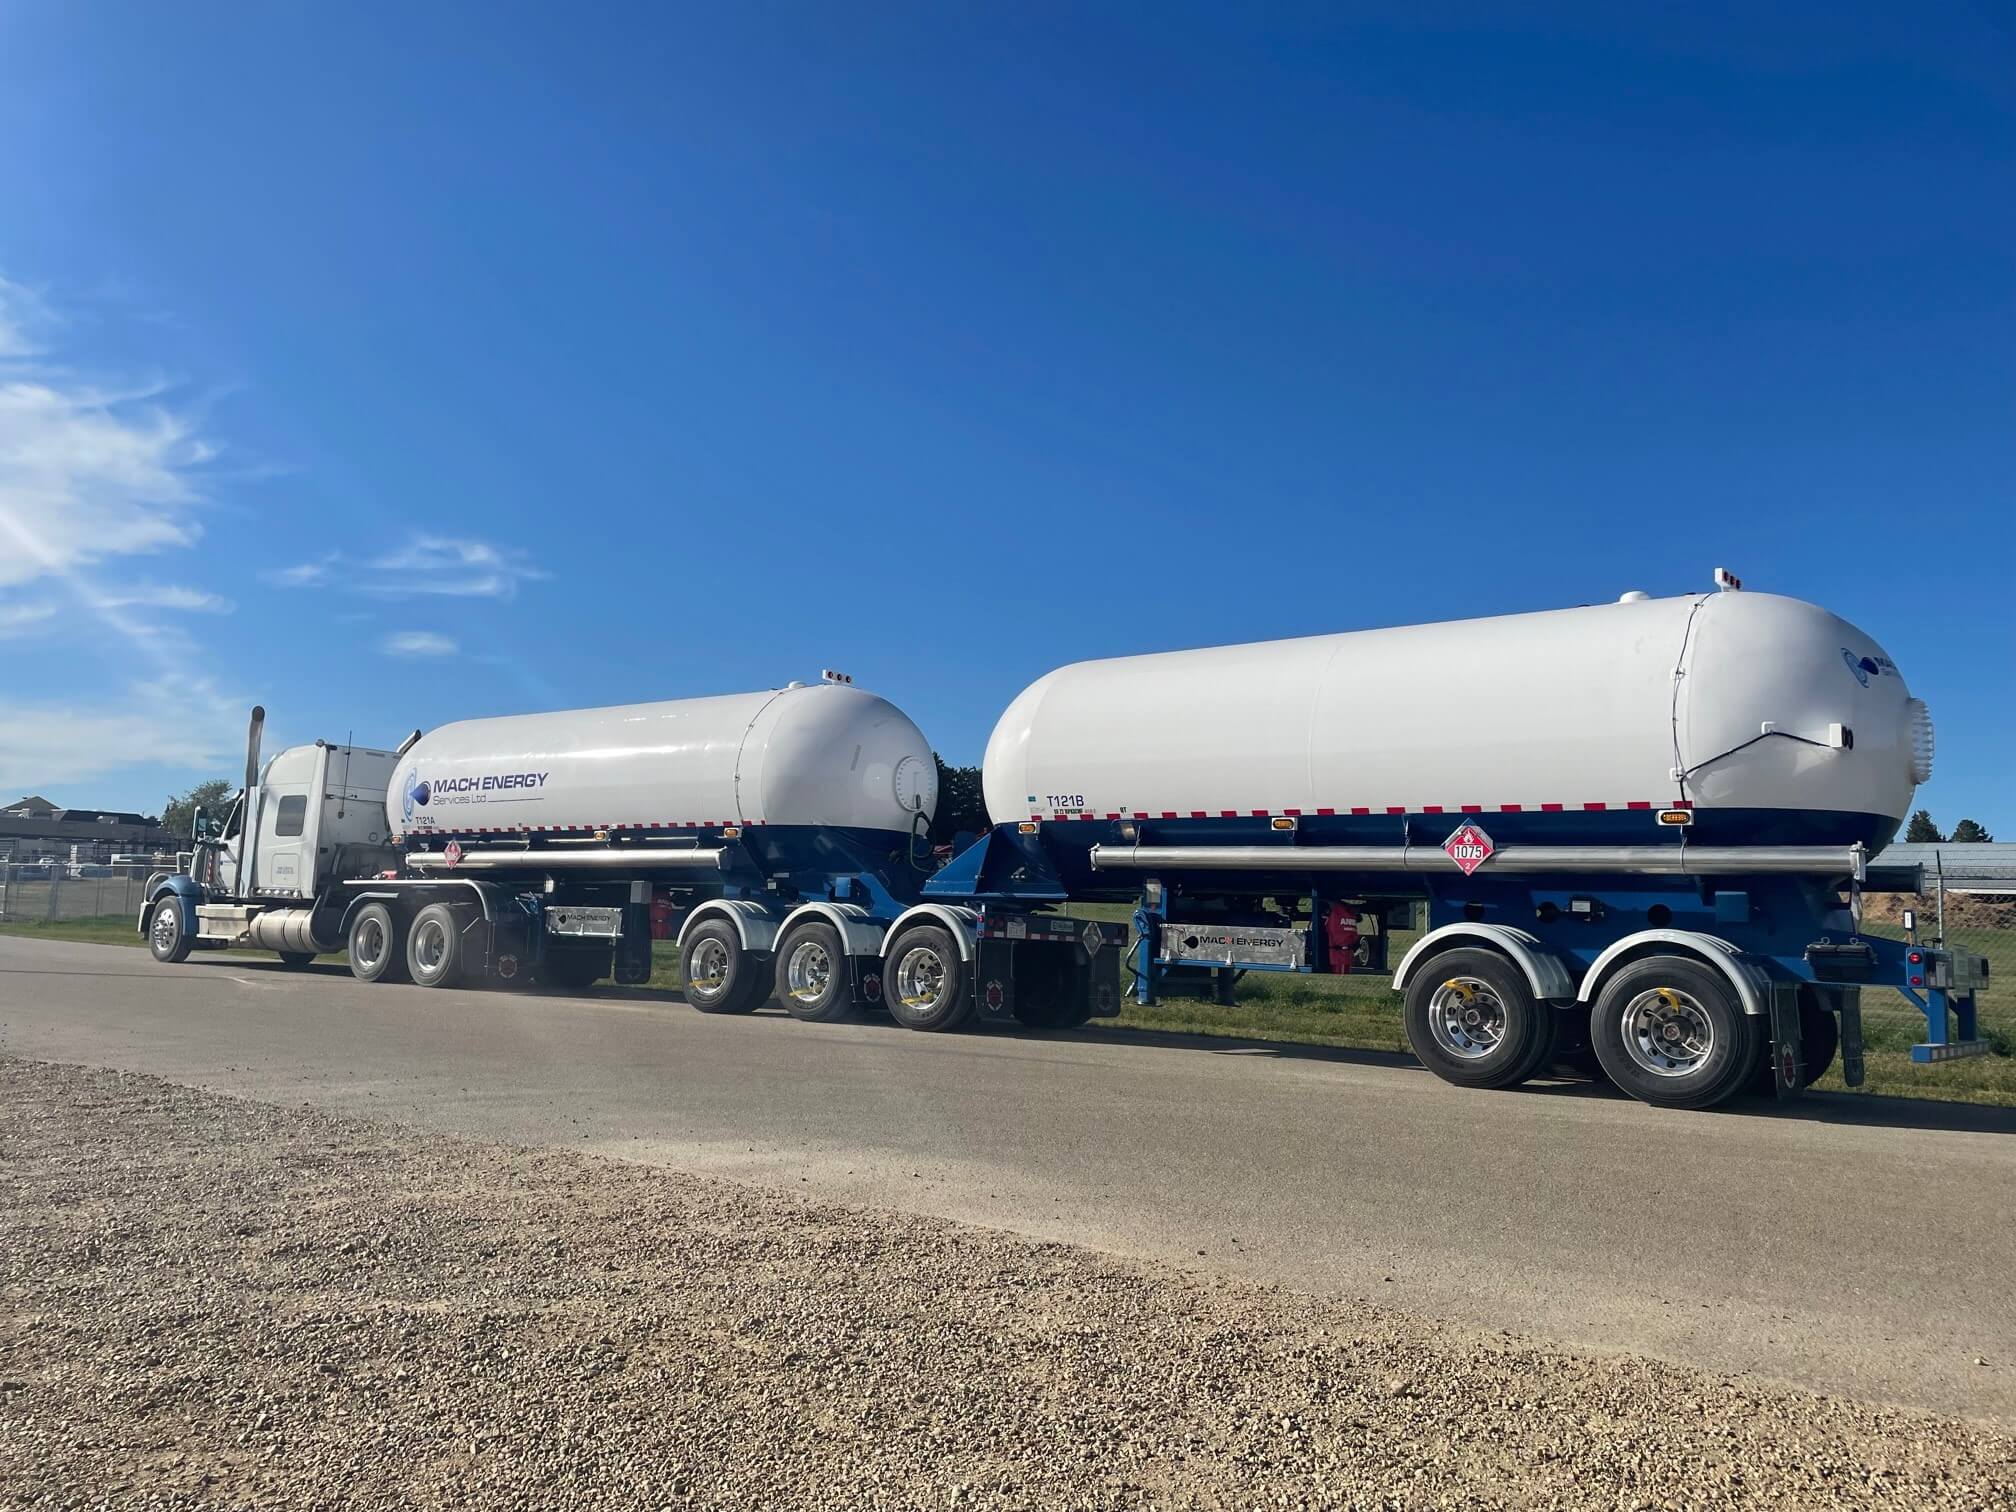 Picture of fuel tanker truck on road painted in white